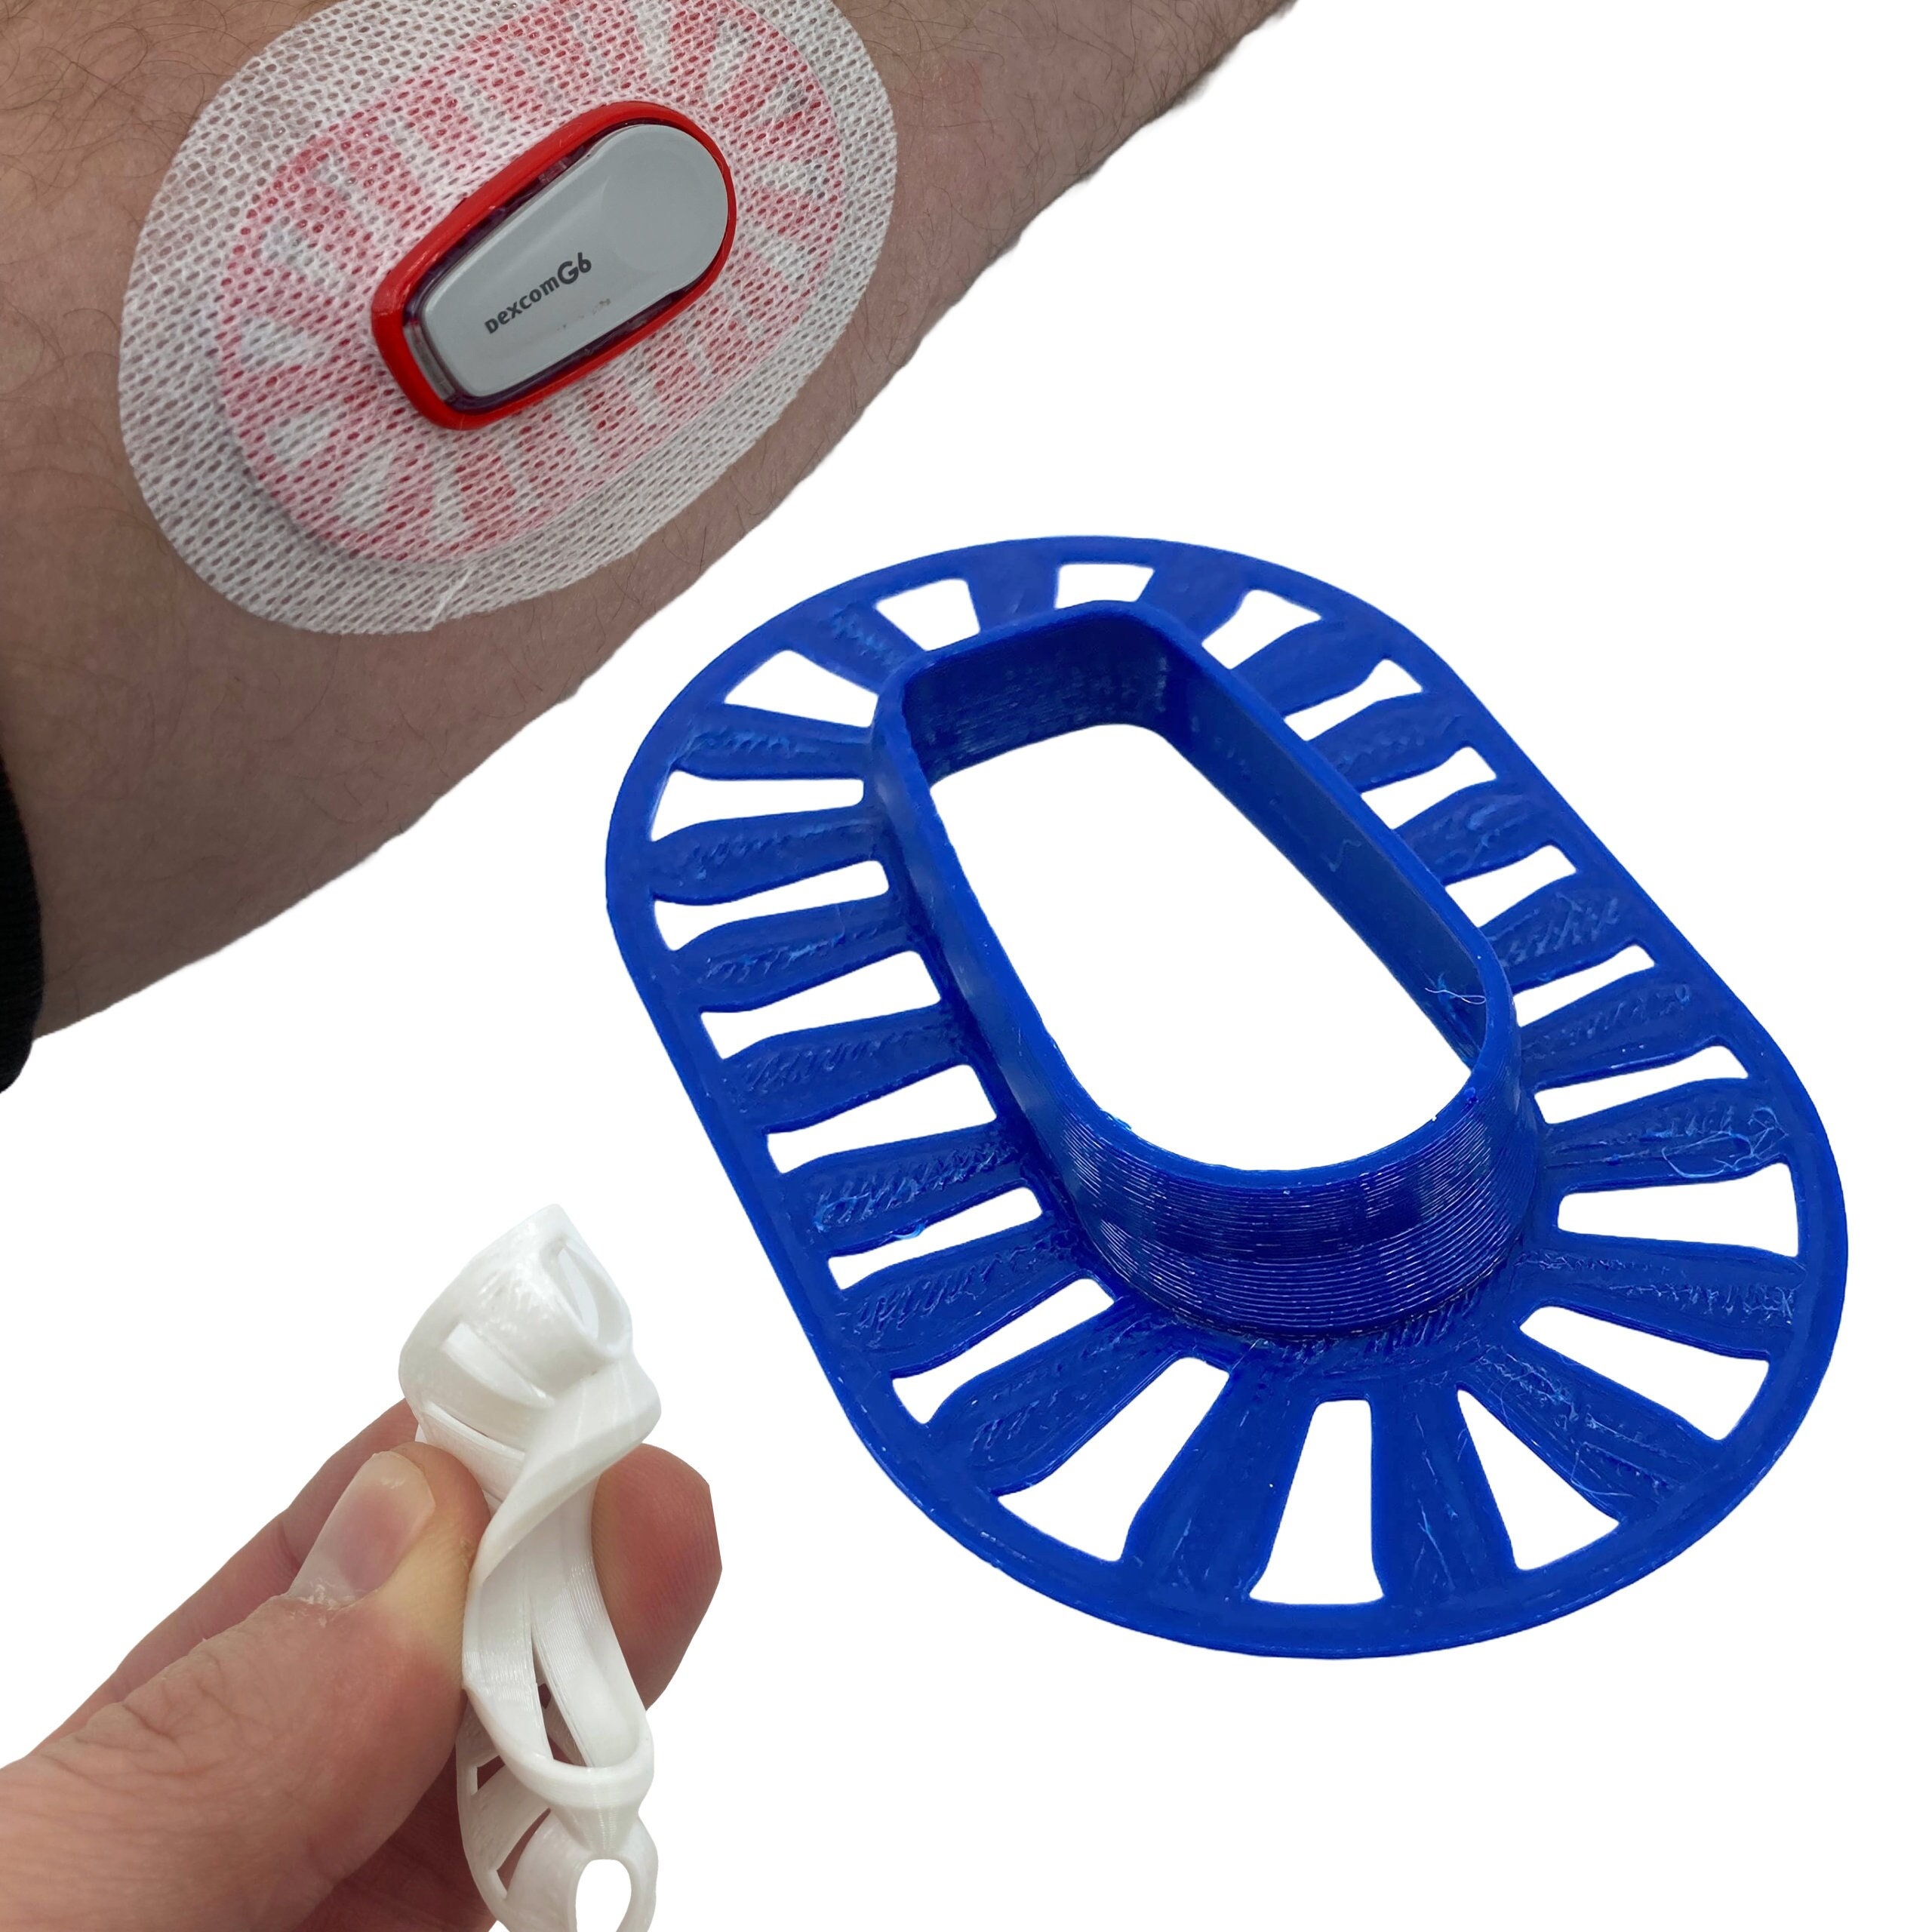 100 Pcs Adhesive Patch Sensor Covers CGM Sensor Patches Waterproof and  Sweatproof Pre Cut Adhesive Tape for Skin Continuous Glucose Monitor  Protection